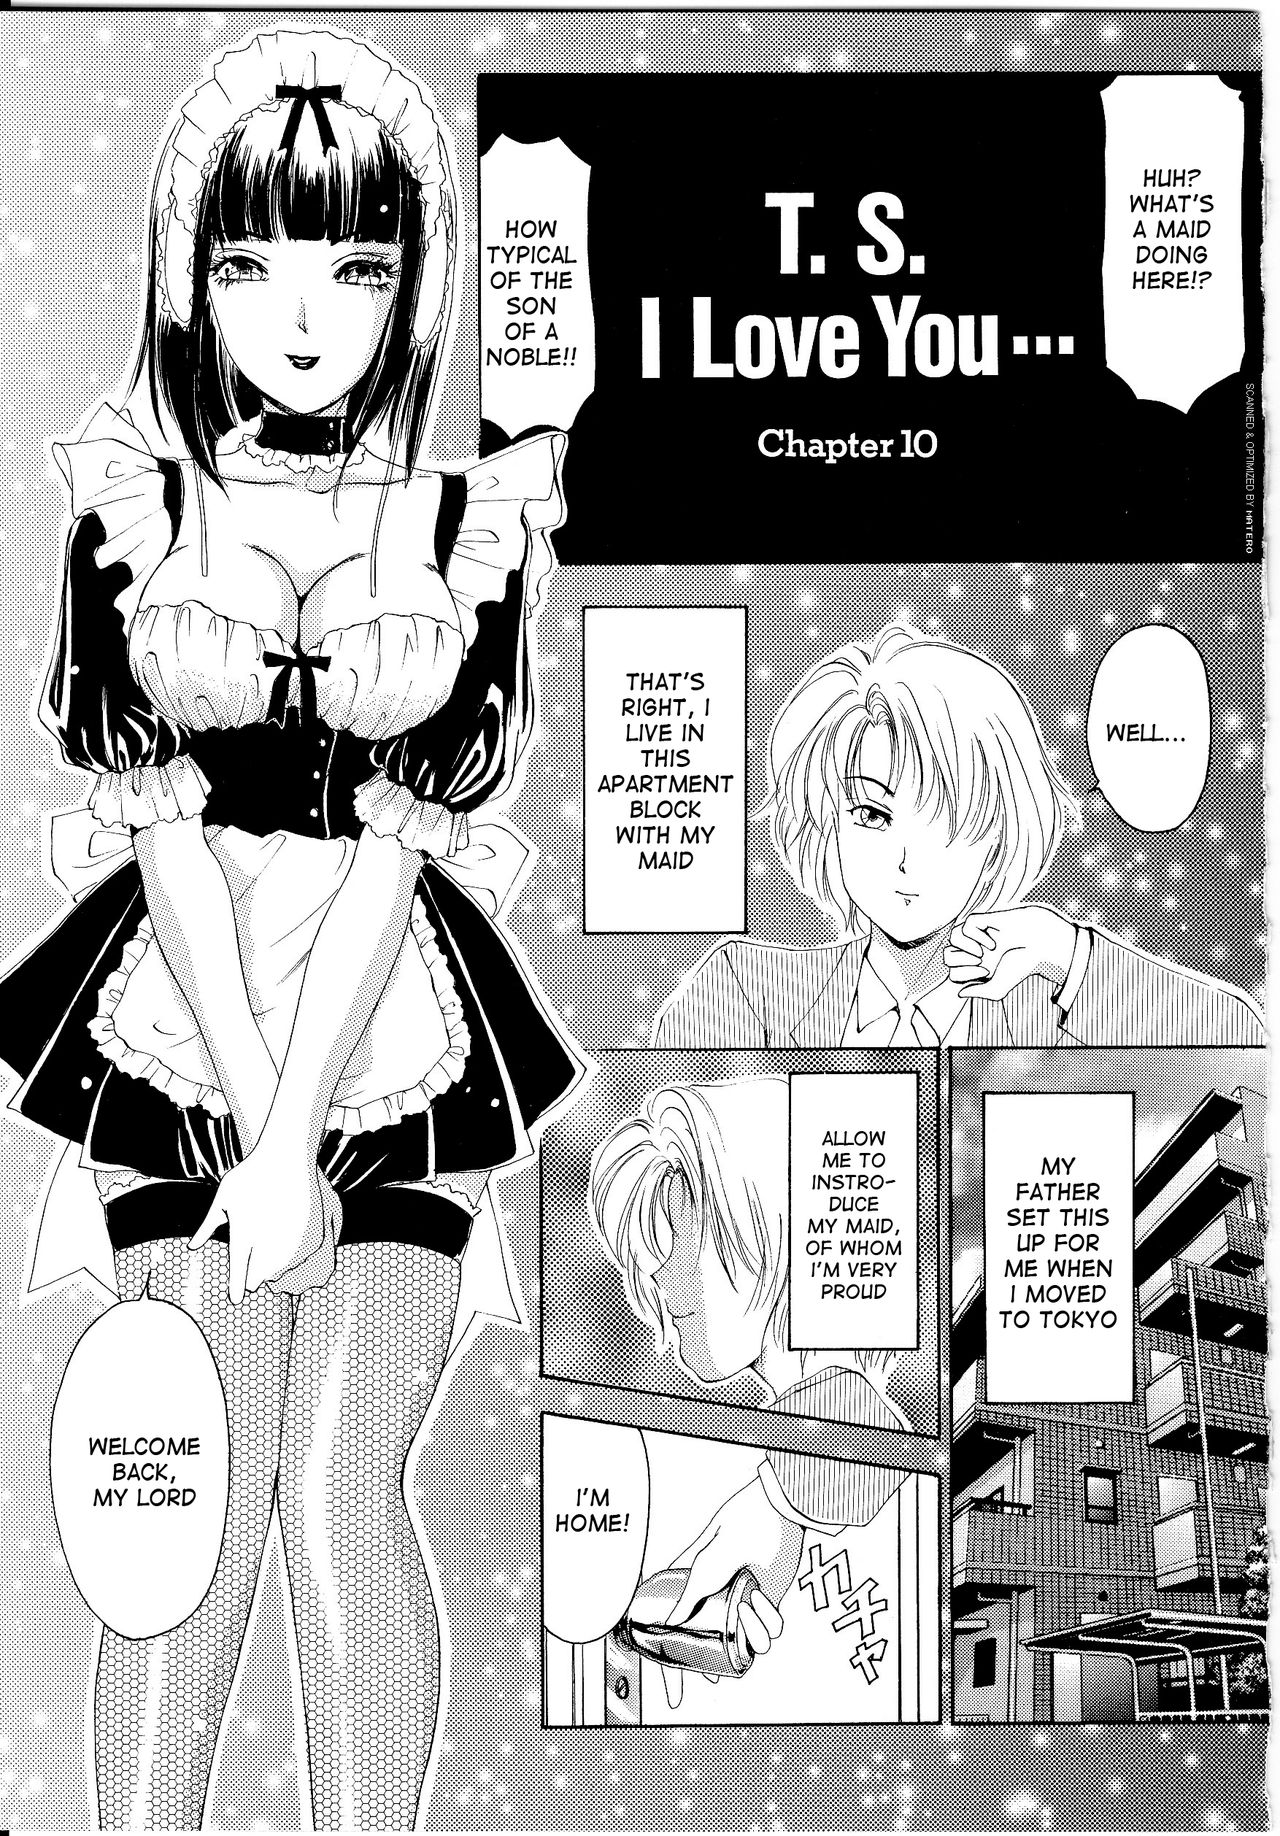 [The Amanoja9] T.S. I LOVE YOU... 1 Chapter 10 [English] (Remastered) 